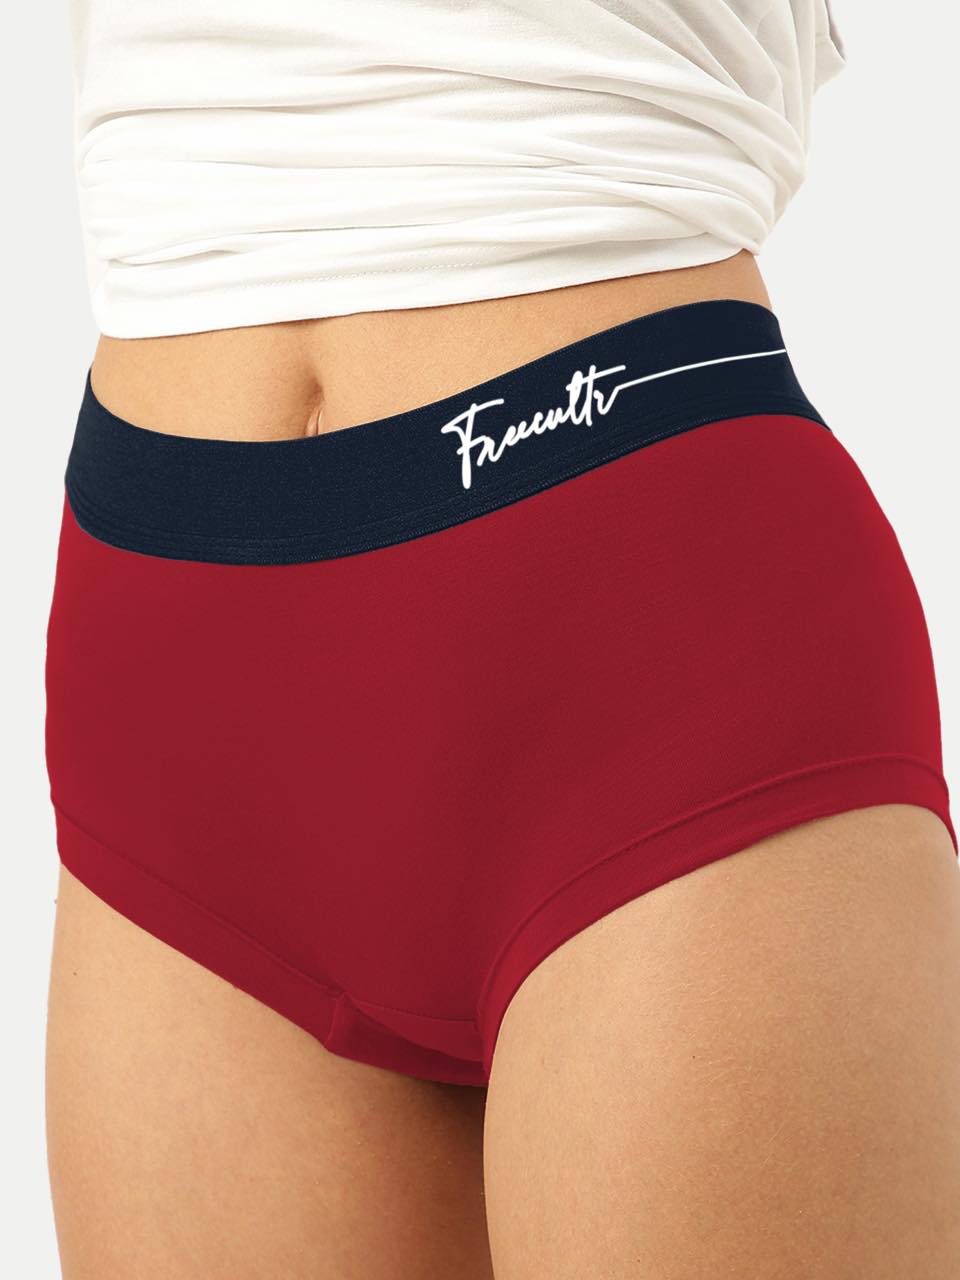 Women's Micro Modal Boxer Brief With Cult Waistband (Pack of 1)